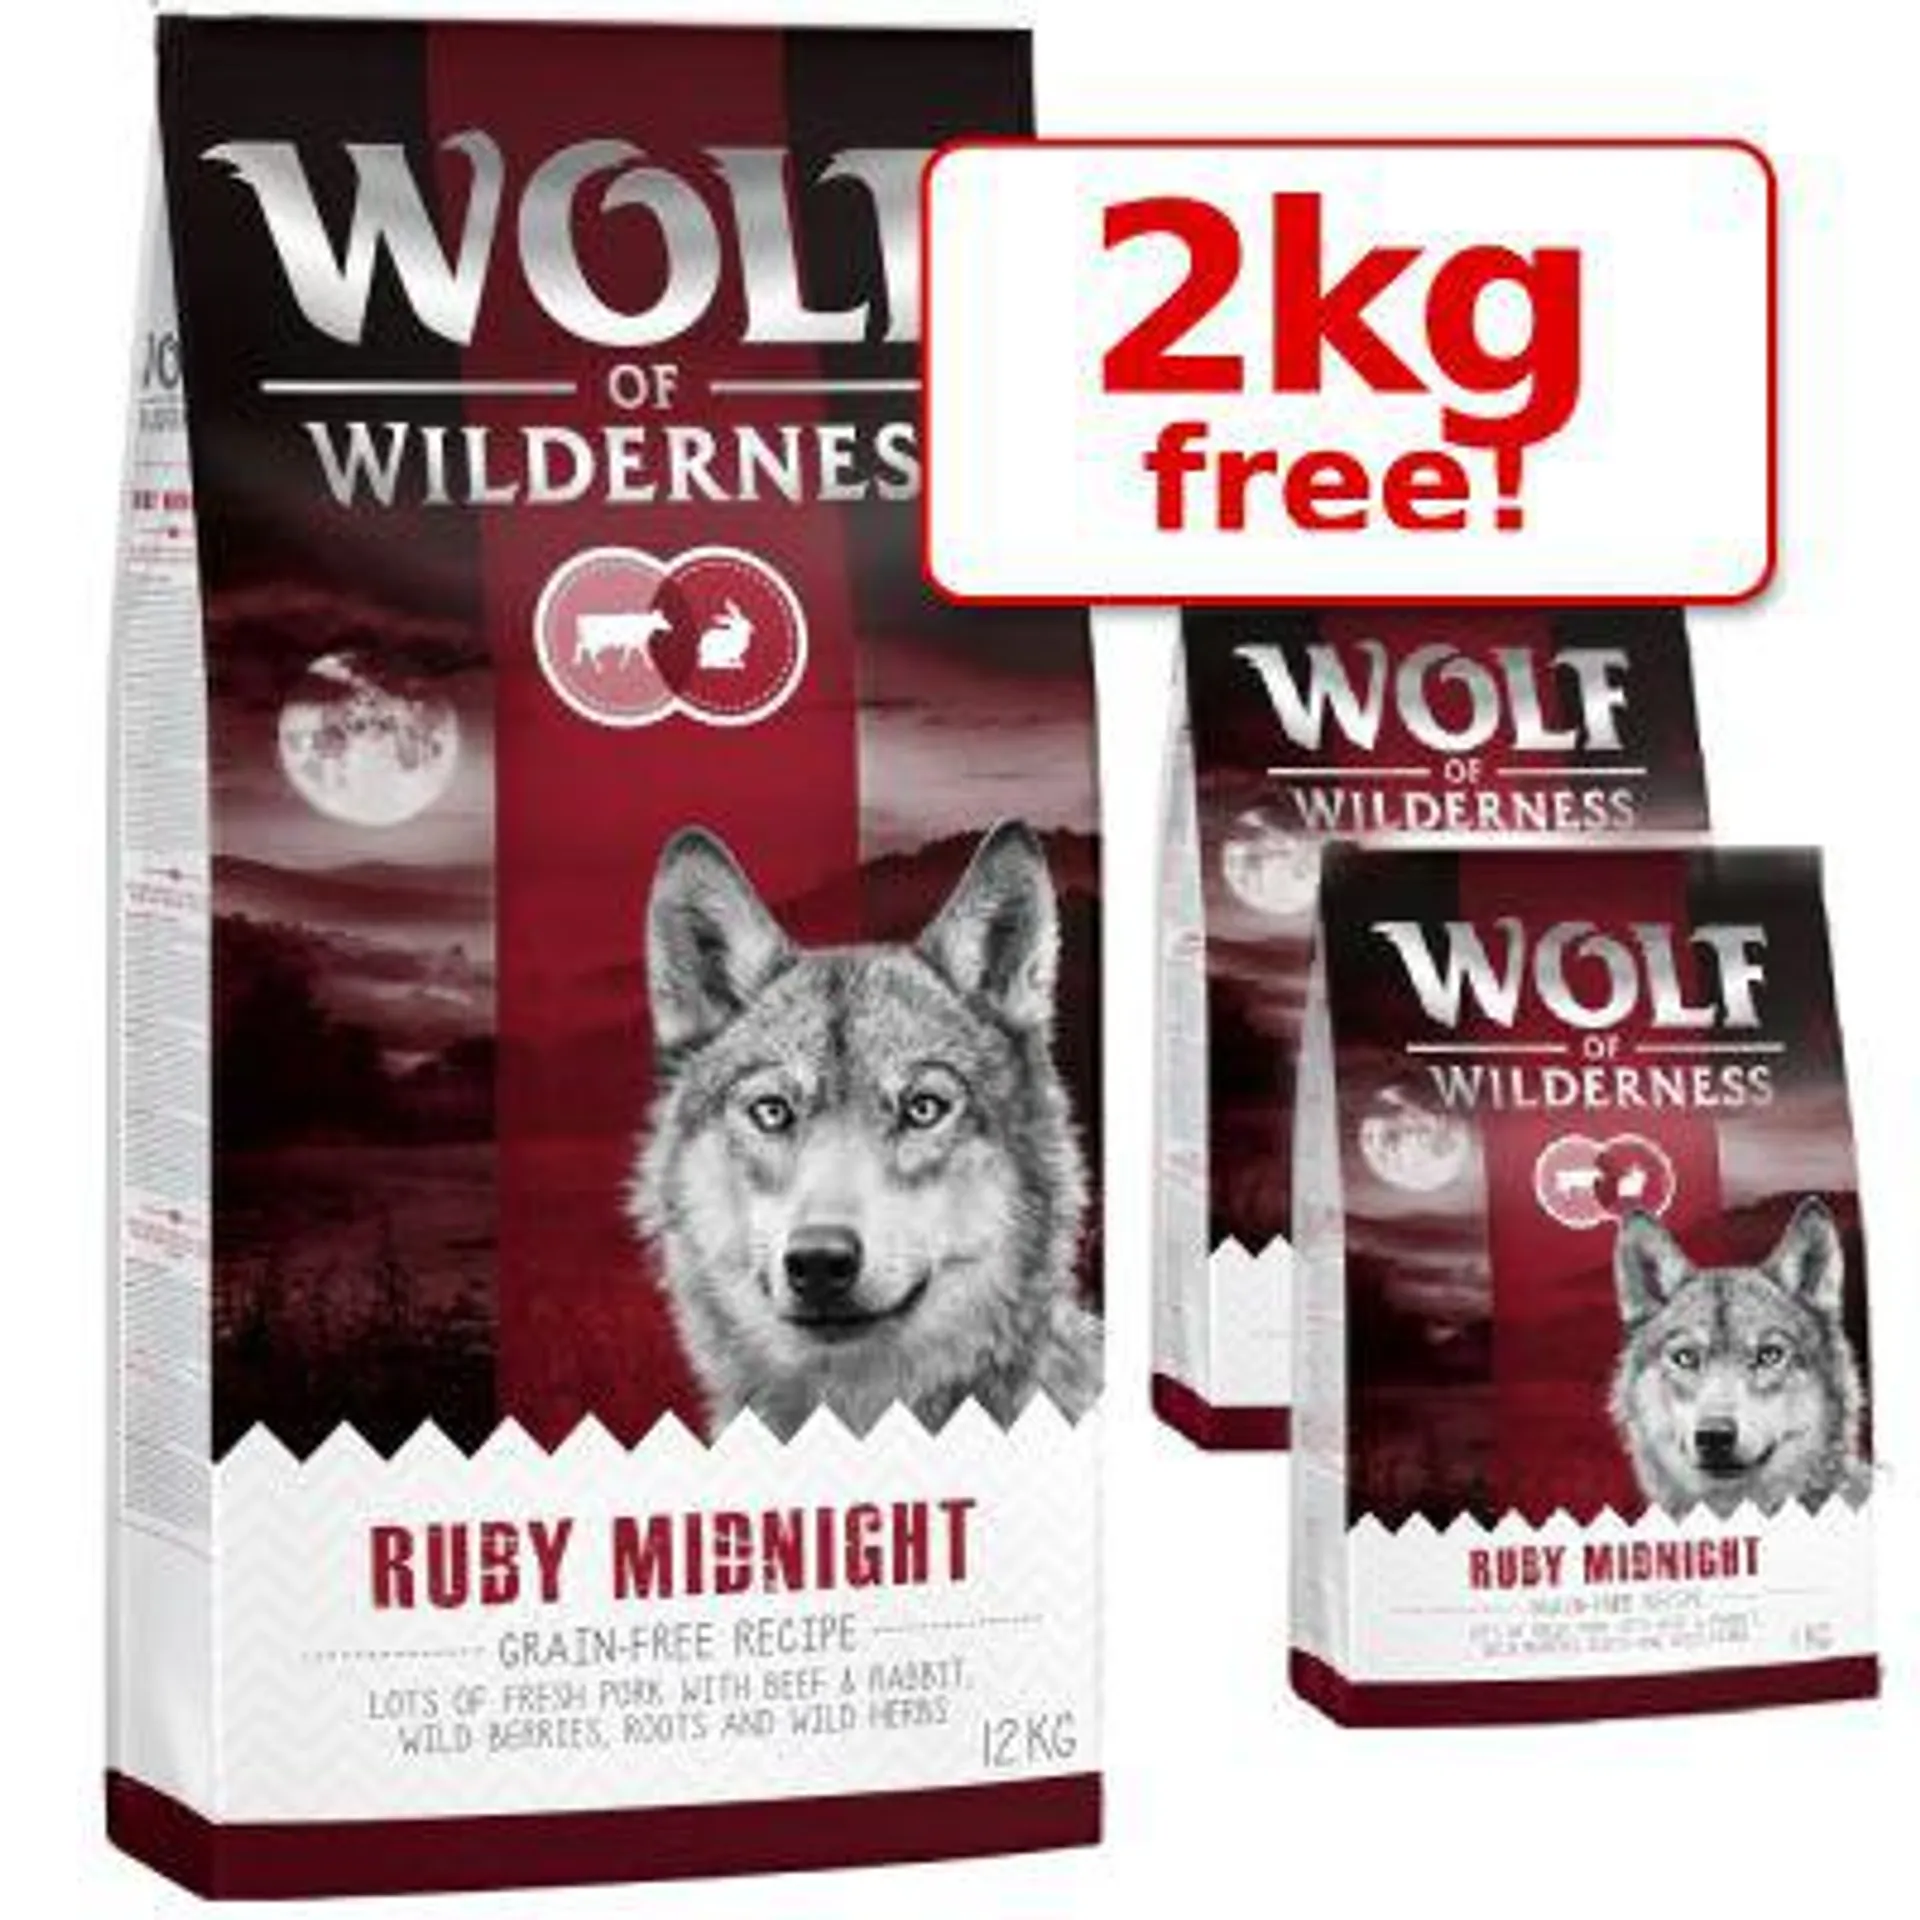 12kg Wolf of Wilderness Dry Dog Food + 2kg Extra Free!*